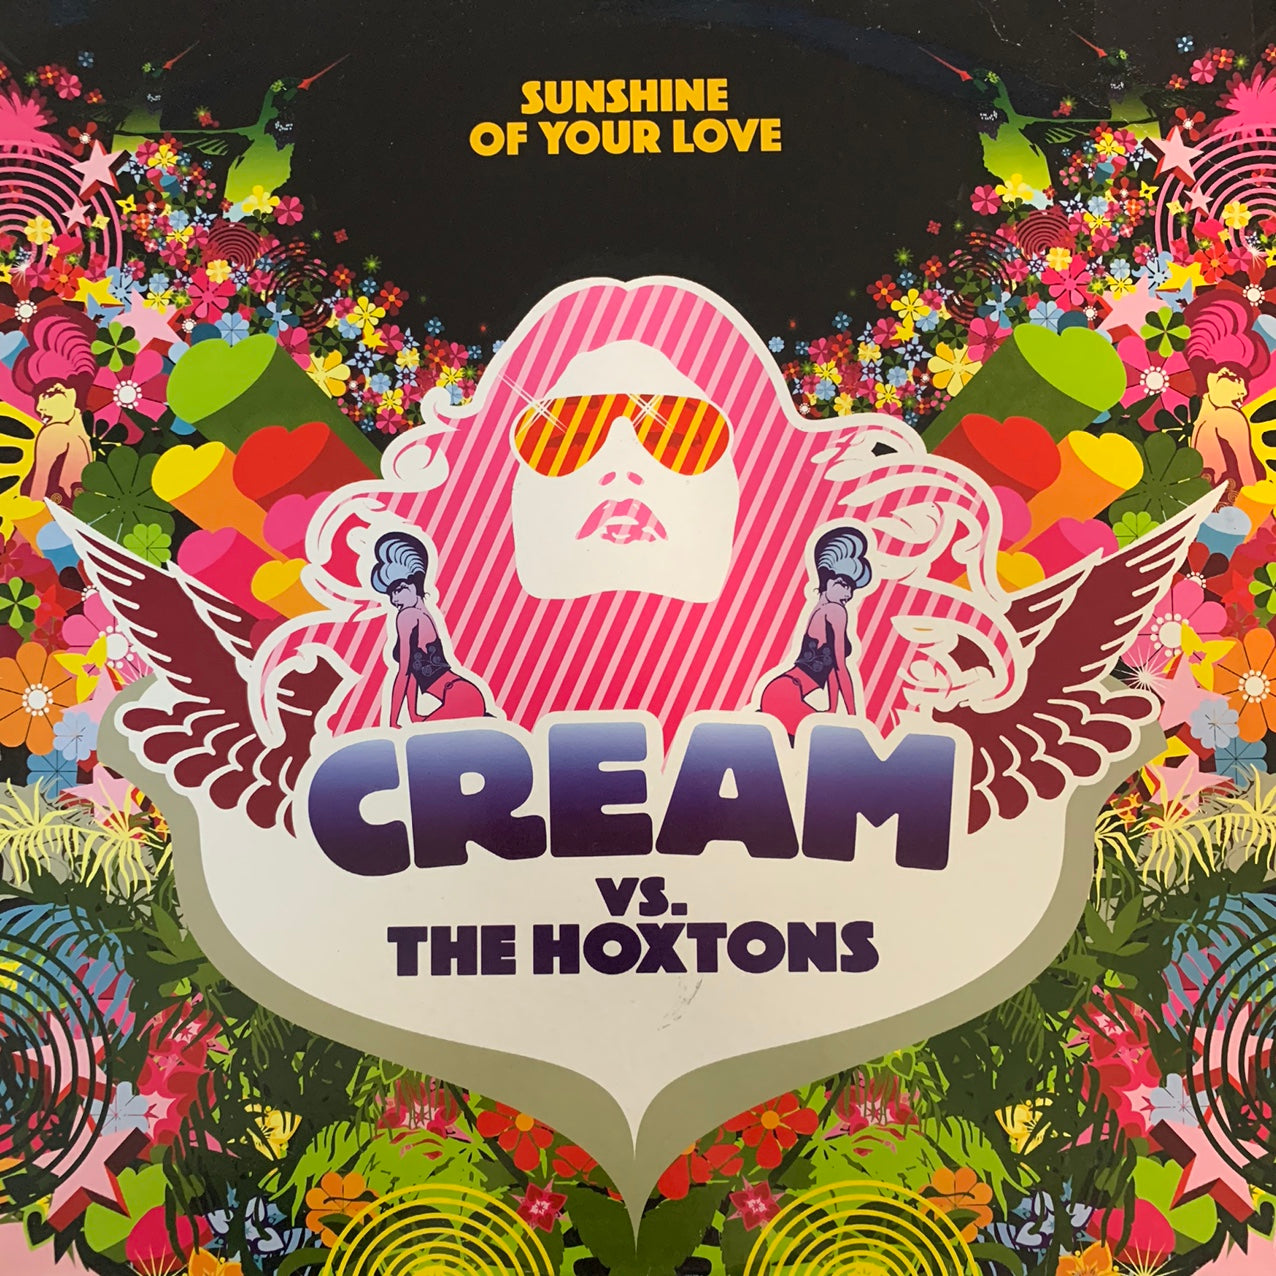 Cream Vs The Hoxtons #Sunshine of Your Love” 3 Track 12inch Vinyl